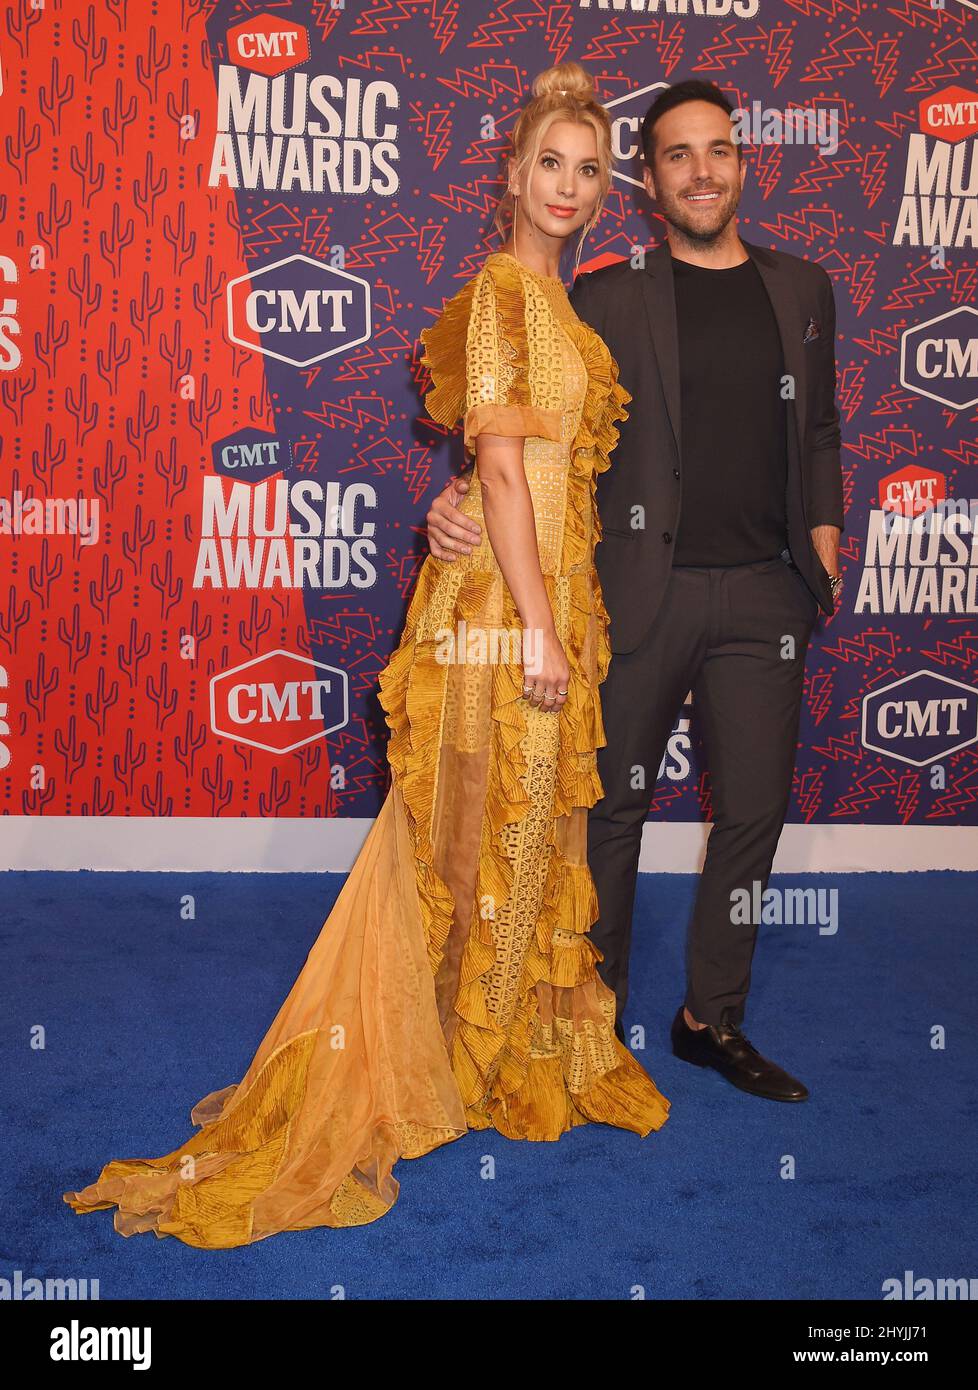 Tyler Rich and Sabina Gadecki at the 2019 CMT Music Awards held at the Bridgestone Arena on June 5, 2019 in Nashville, TN. Stock Photo